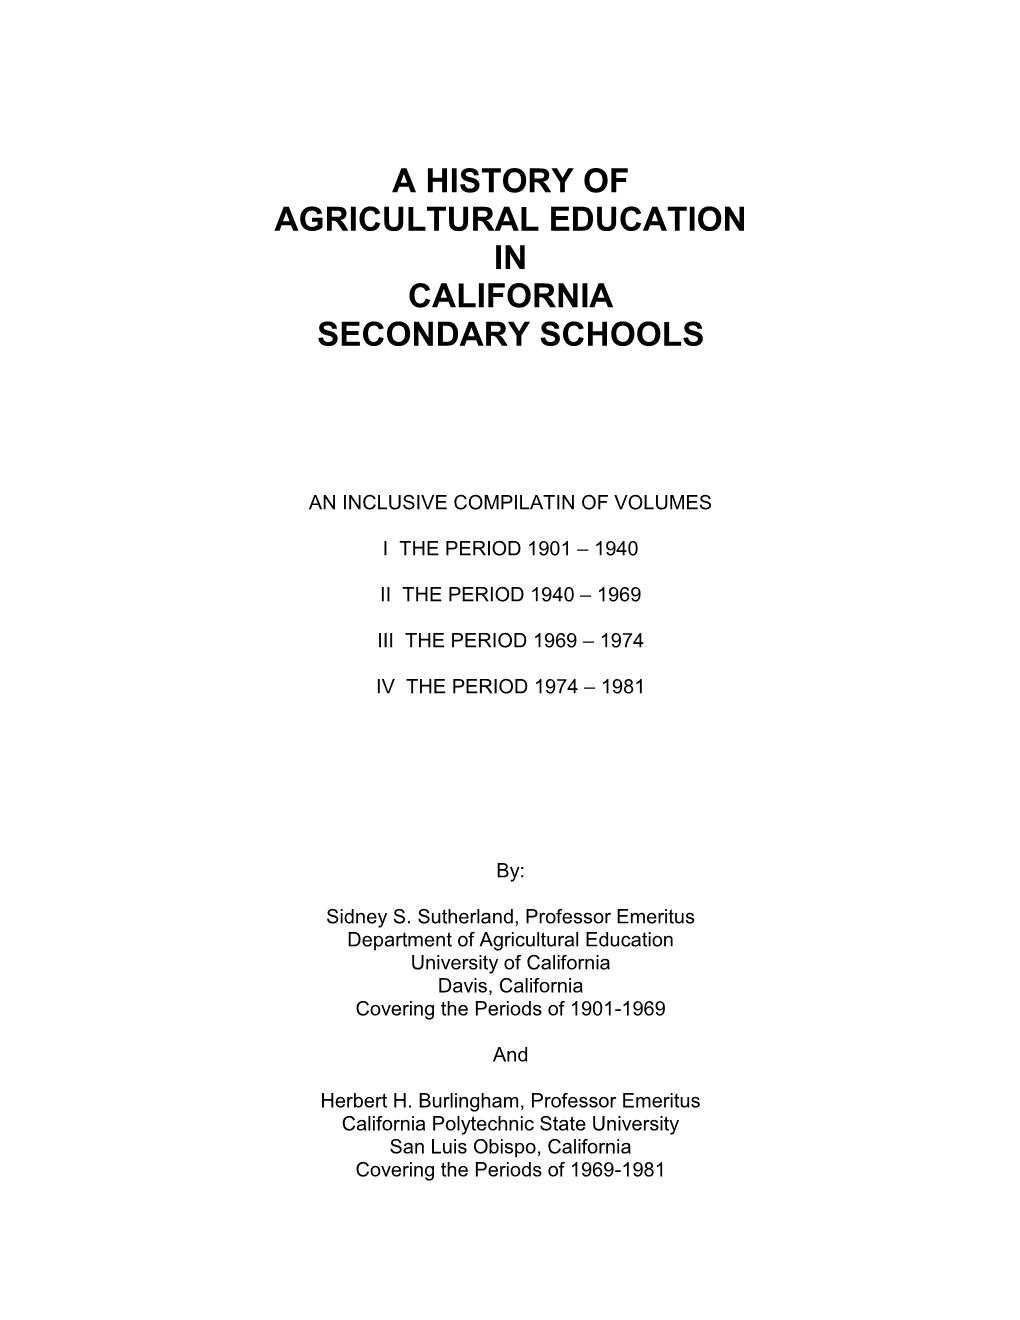 A History of Agricultural Education in California Secondary Schools